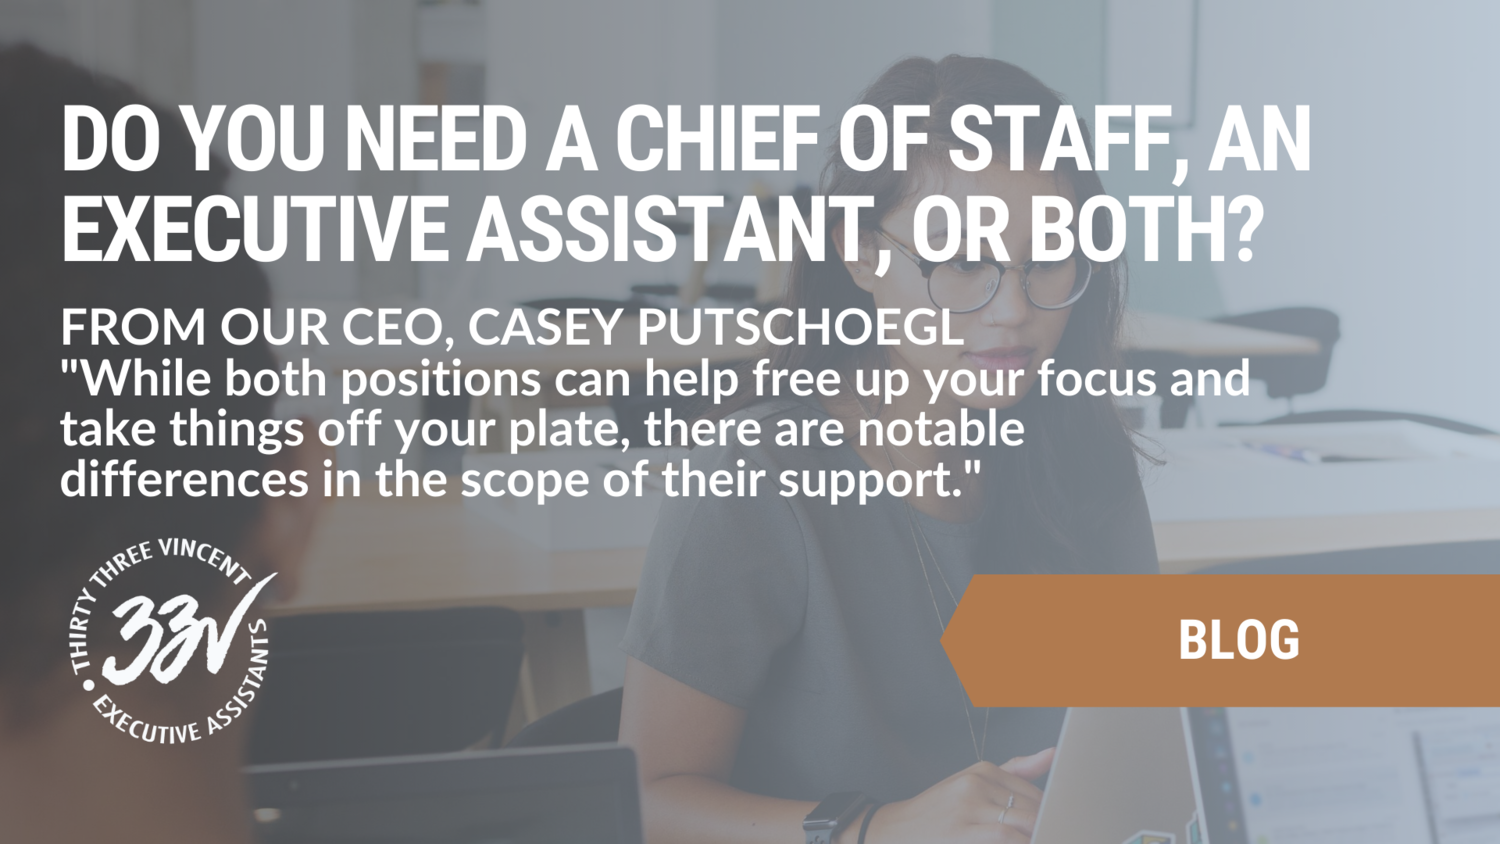 Do You Need a Chief of Staff, an Executive Assistant, or Both?